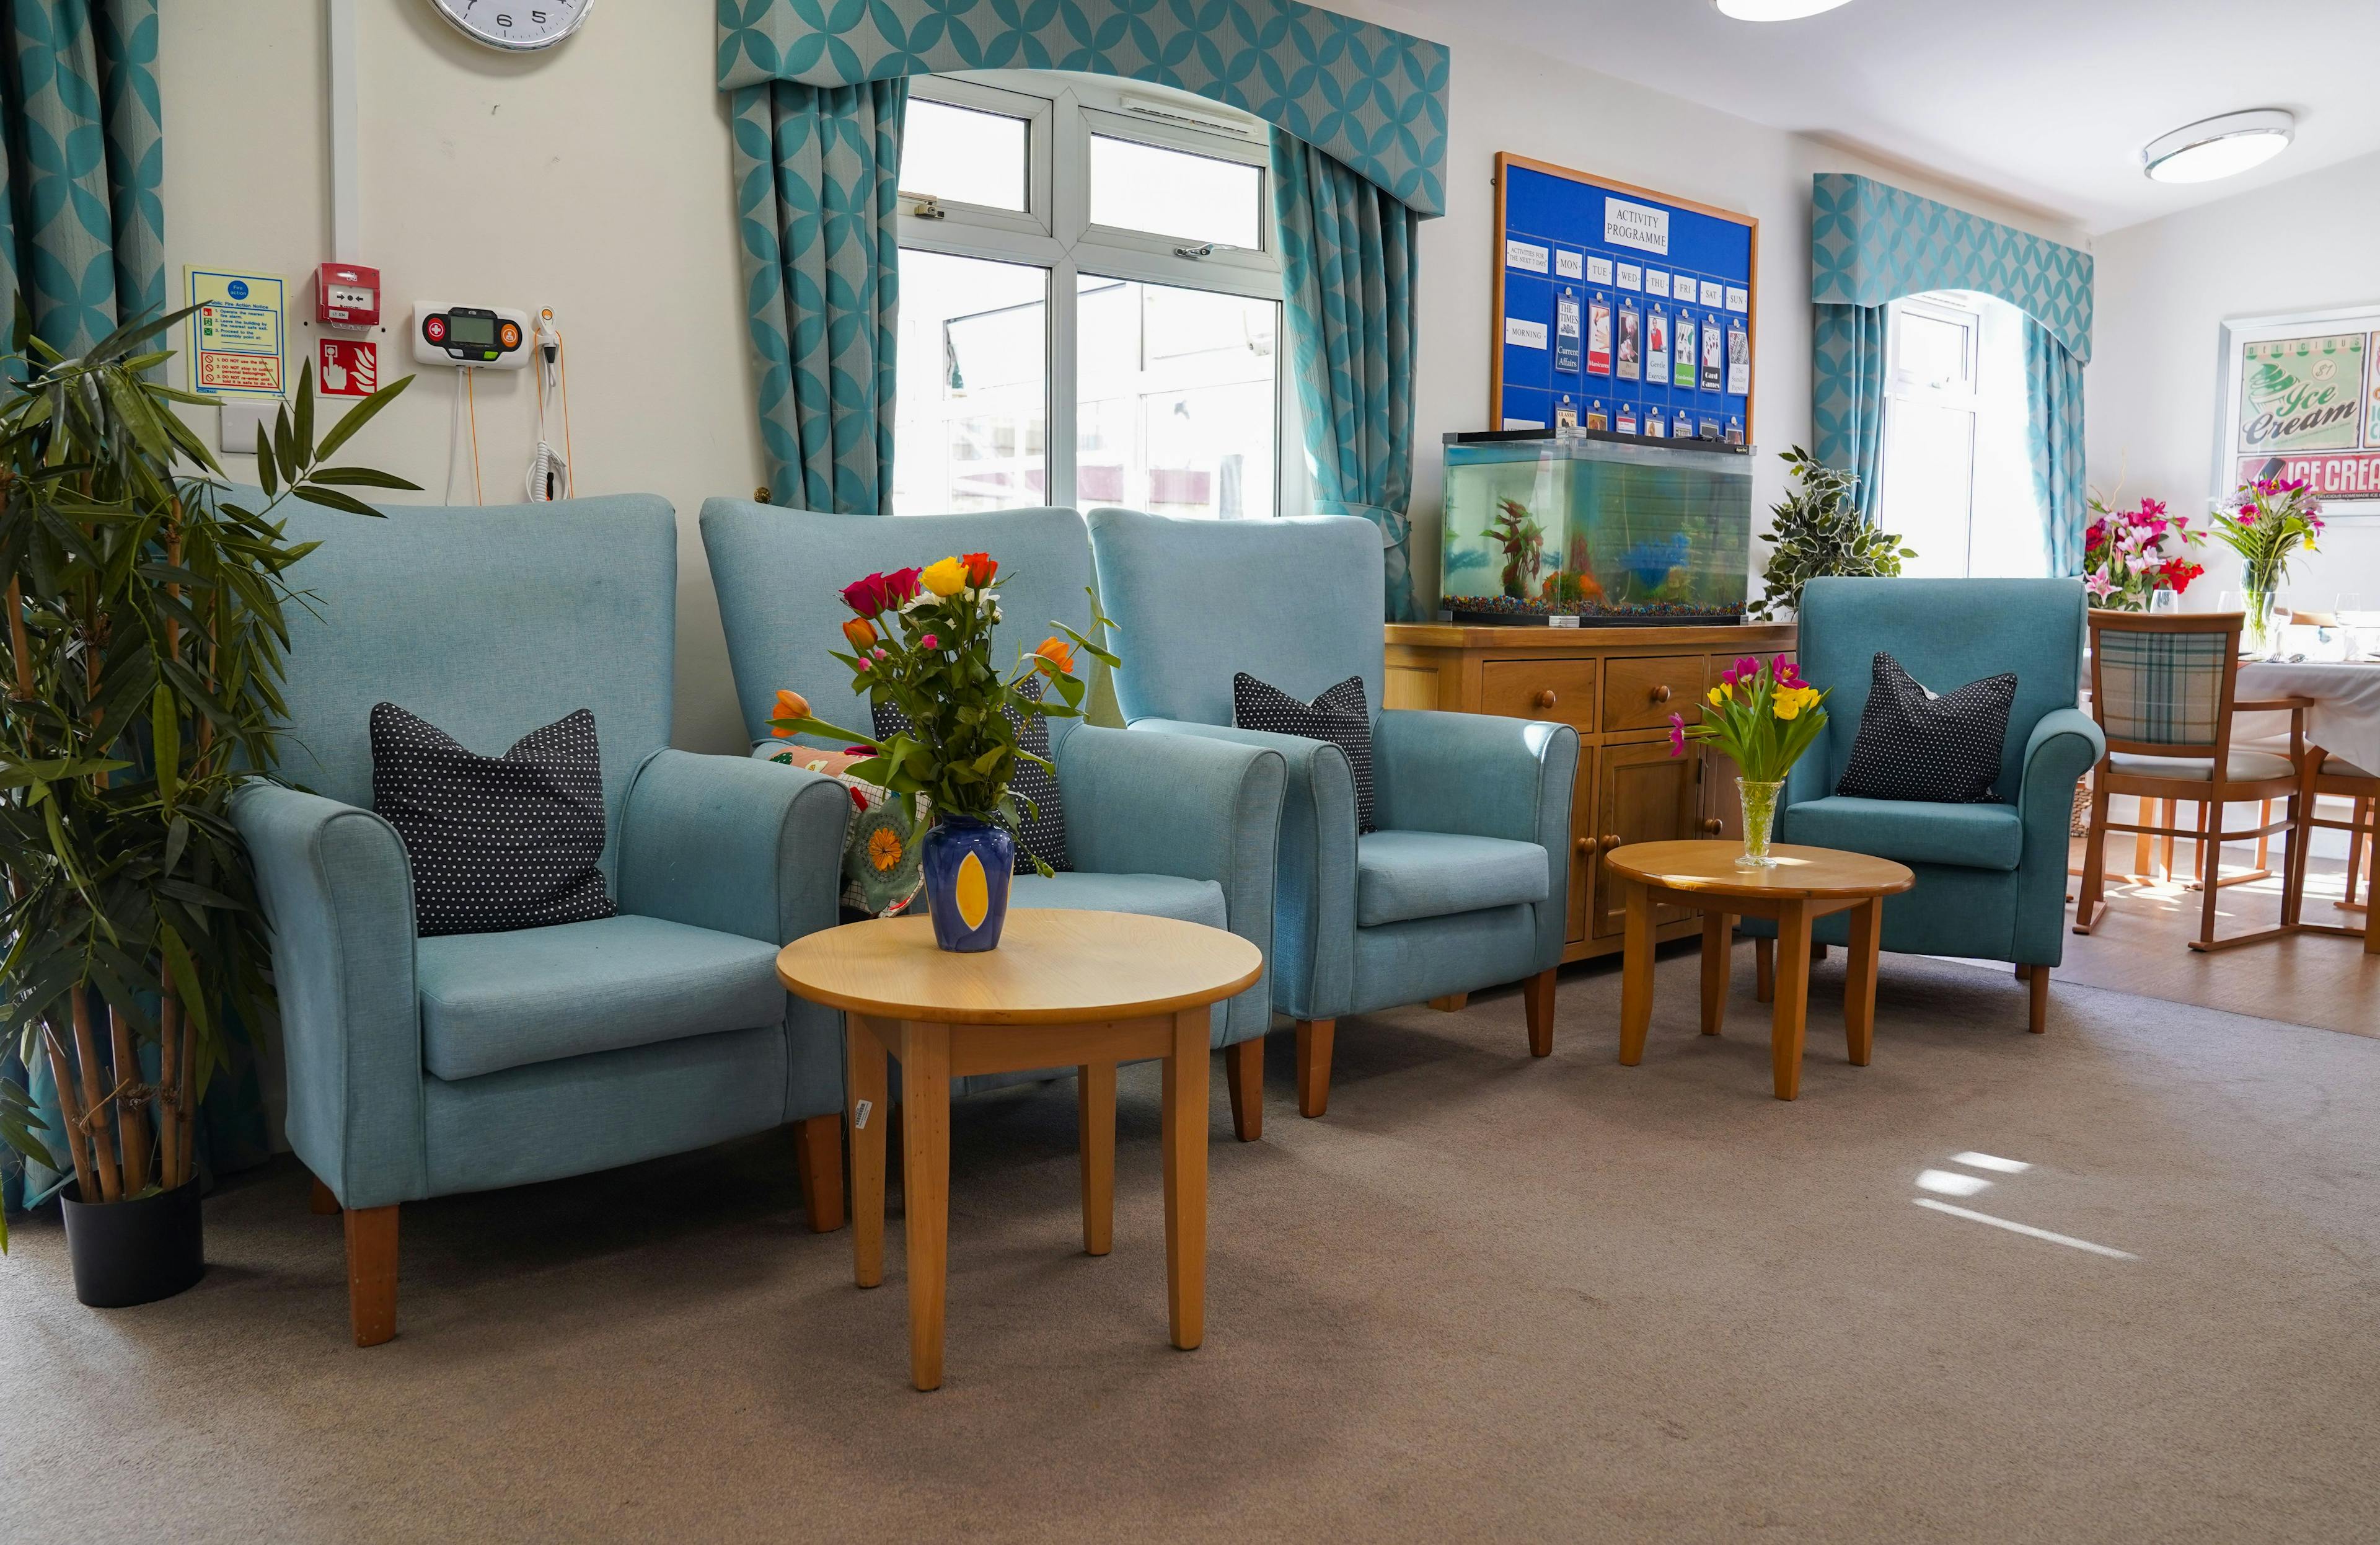 Communal Area at The Manse Residential Care Home, South Norwood, London